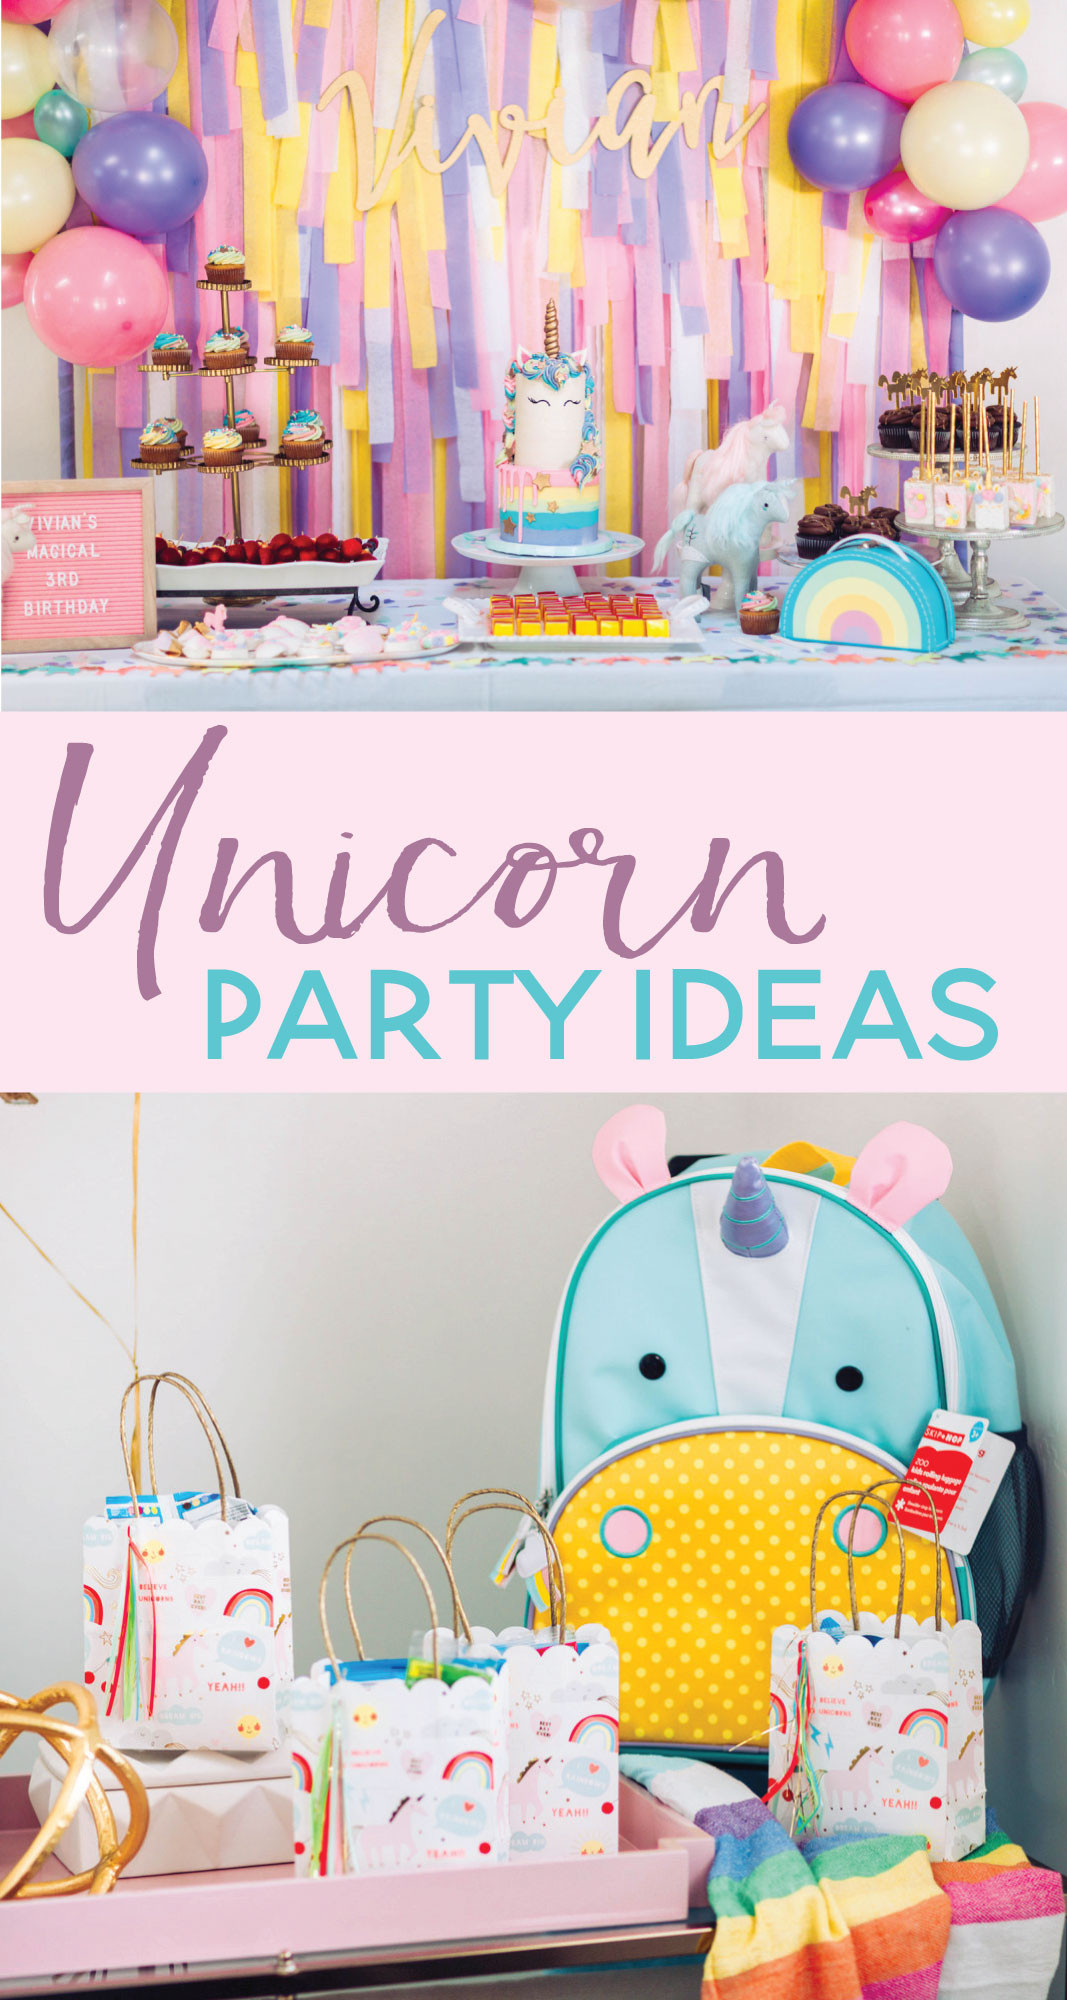 Ideas For A Unicorn Child'S Birthday Party
 Magical Unicorn Birthday Party Parties